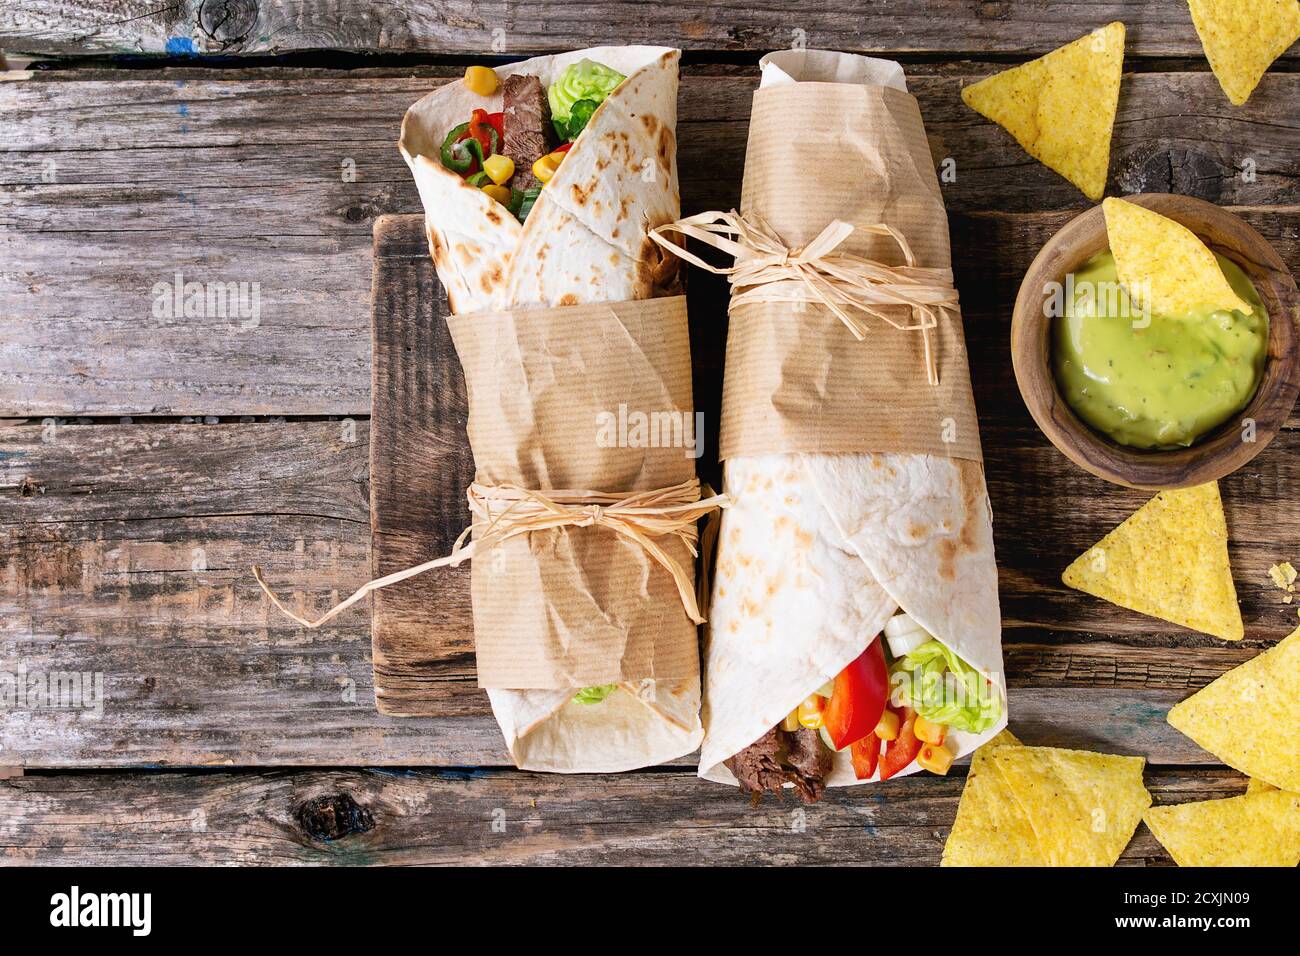 Mexican style dinner. Two papered tortillas burrito with beef and vegetables served with nachos chips and guacomole sauce over old wooden background. Stock Photo